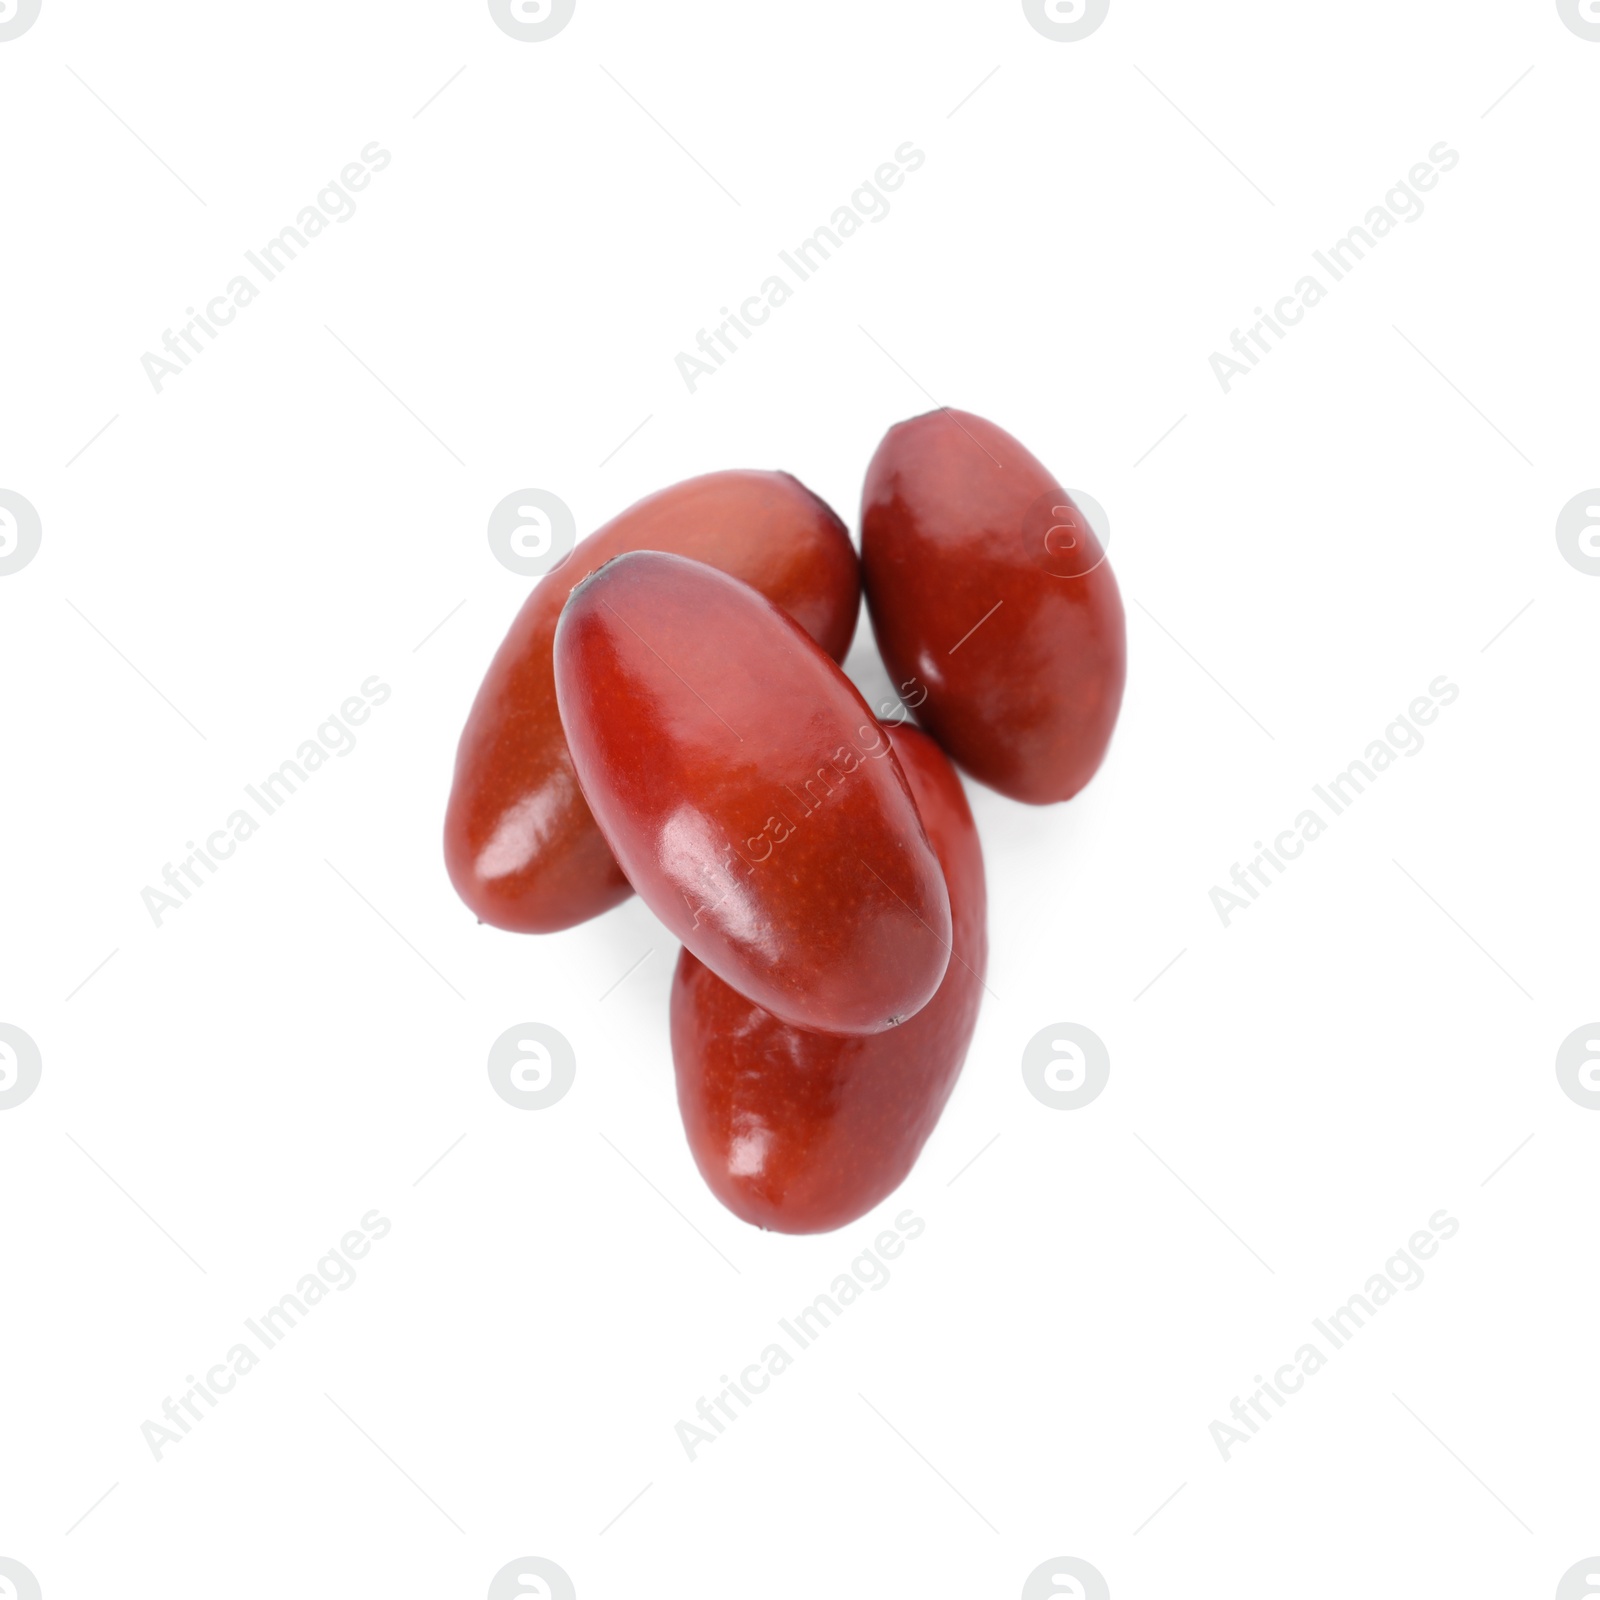 Photo of Heap of ripe red dates on white background, top view